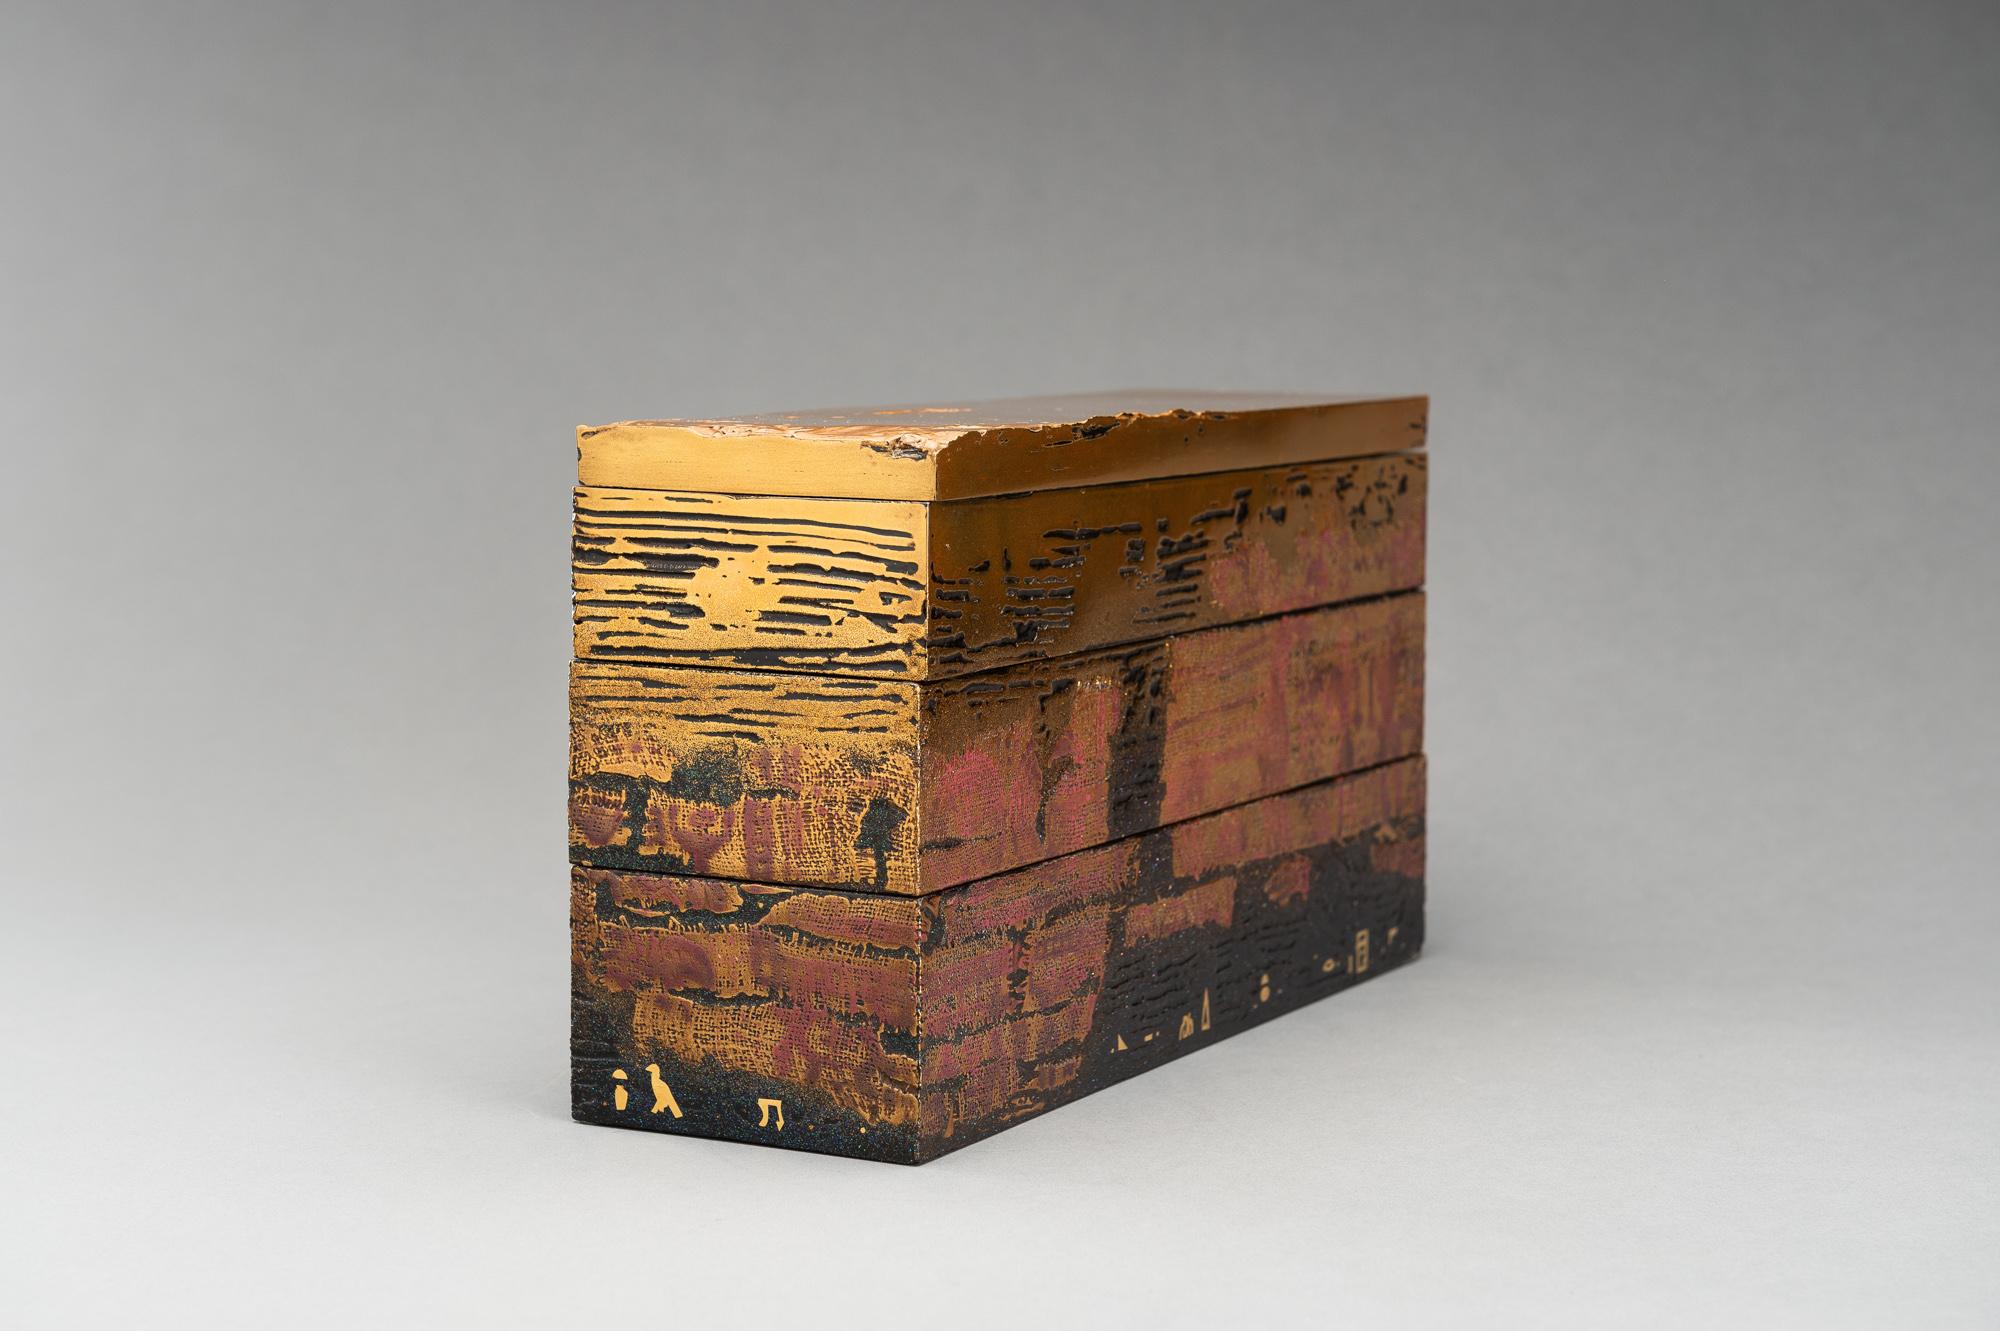 Japanese lacquer oblong storage box by Hiroshi Hayashi 林宏 (1967) For Sale 4